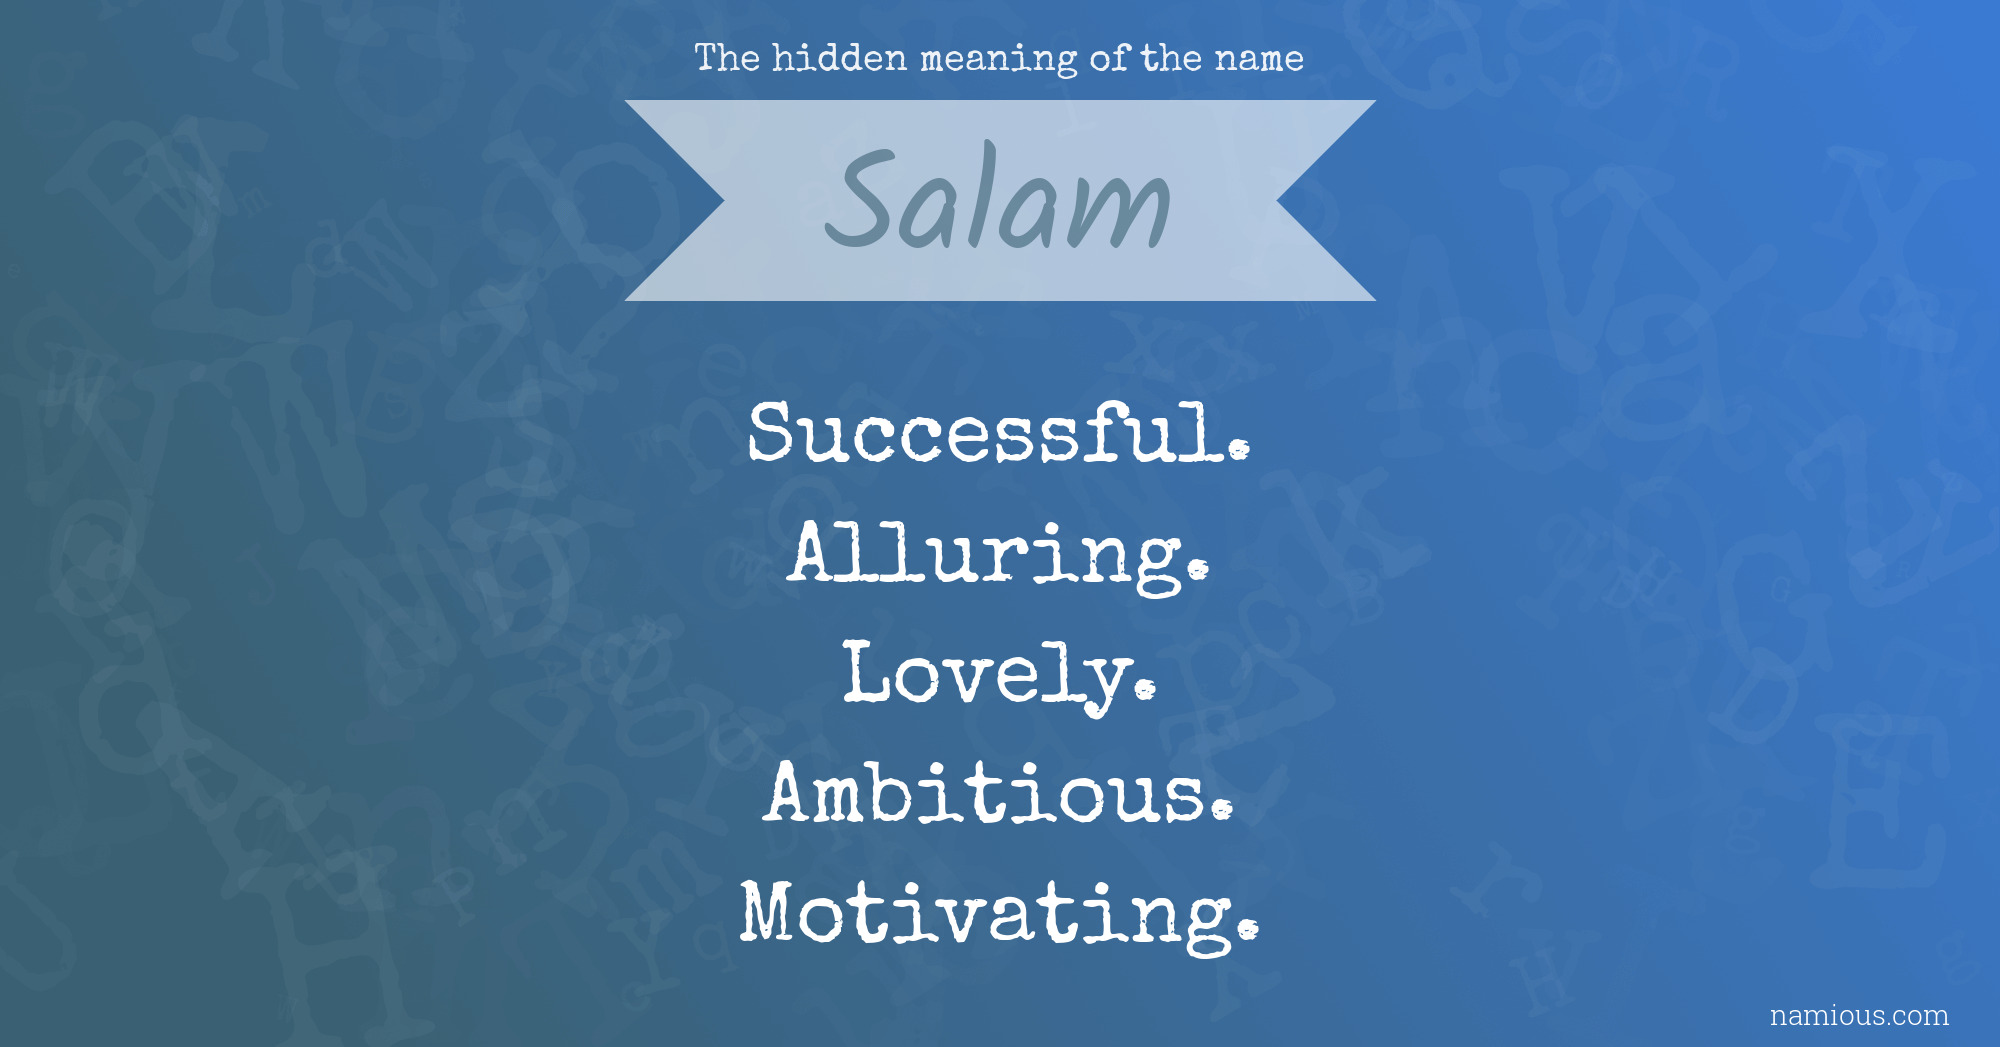 The hidden meaning of the name Salam